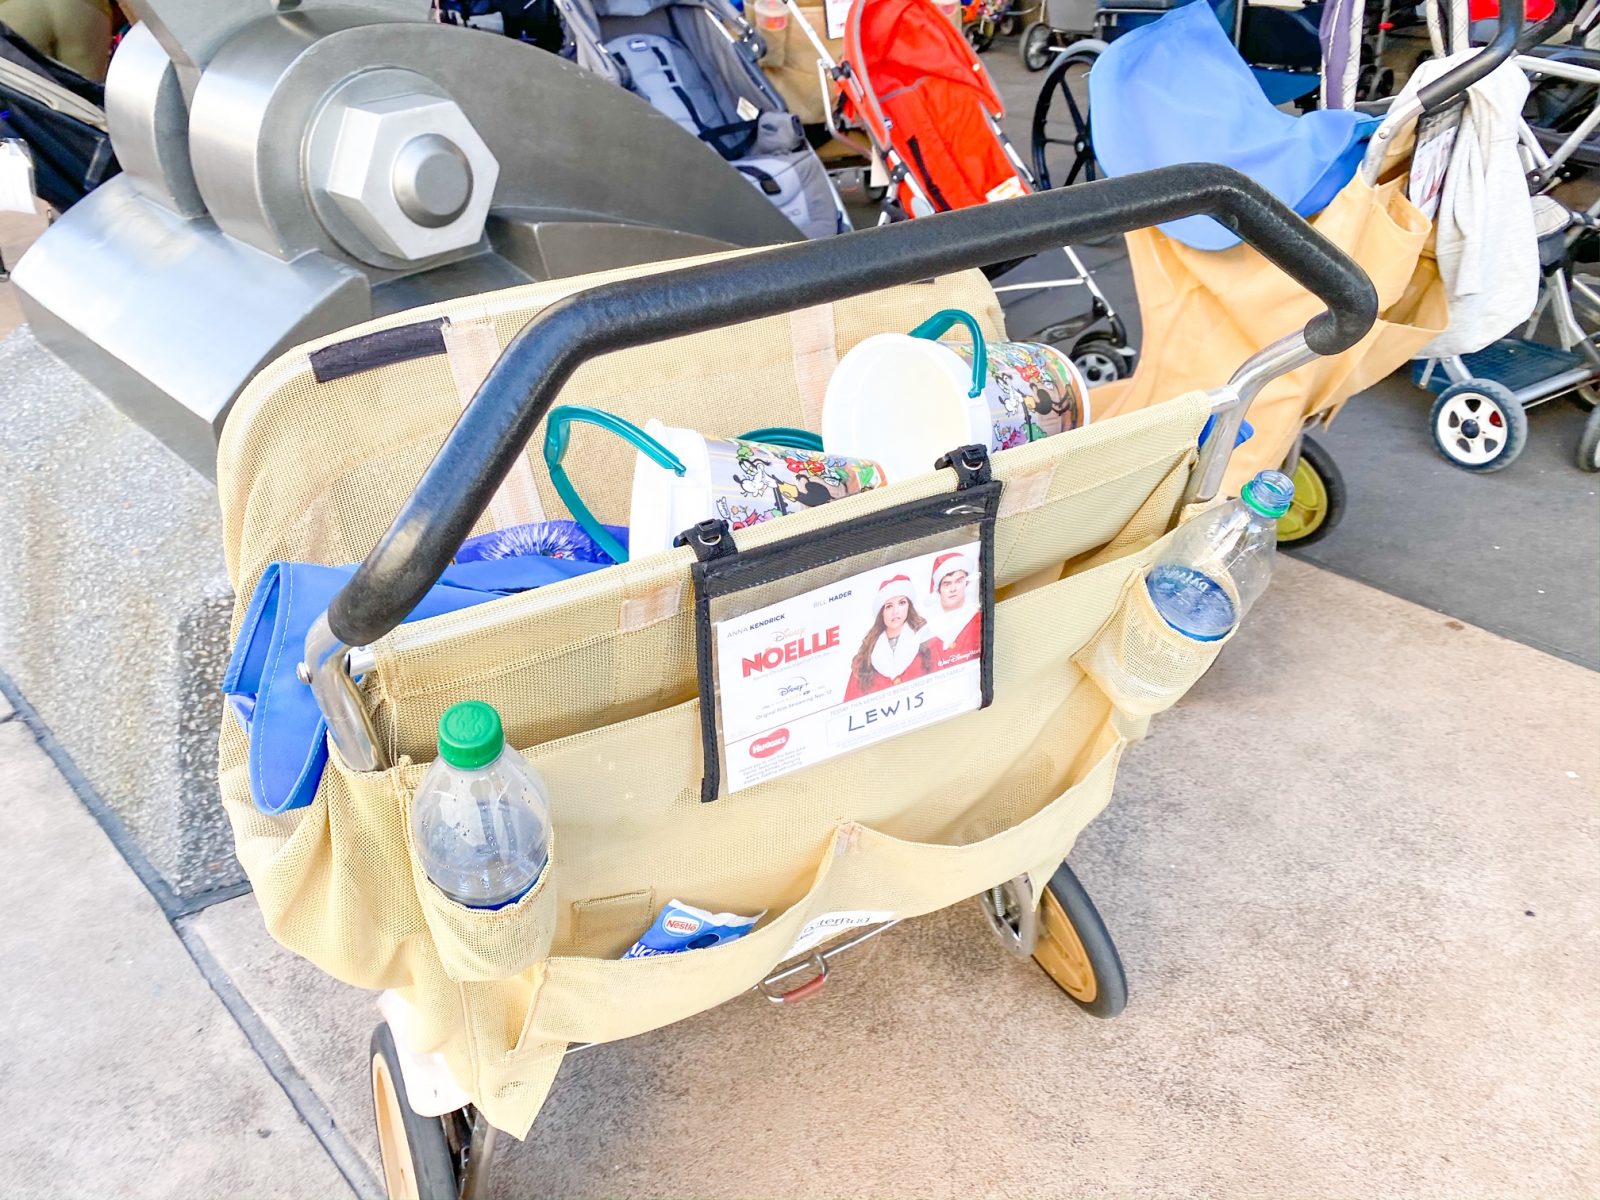 When trying to find your strollers at Disney, look for ways to ID them: this stroller has a laminated card on the back with a name! 